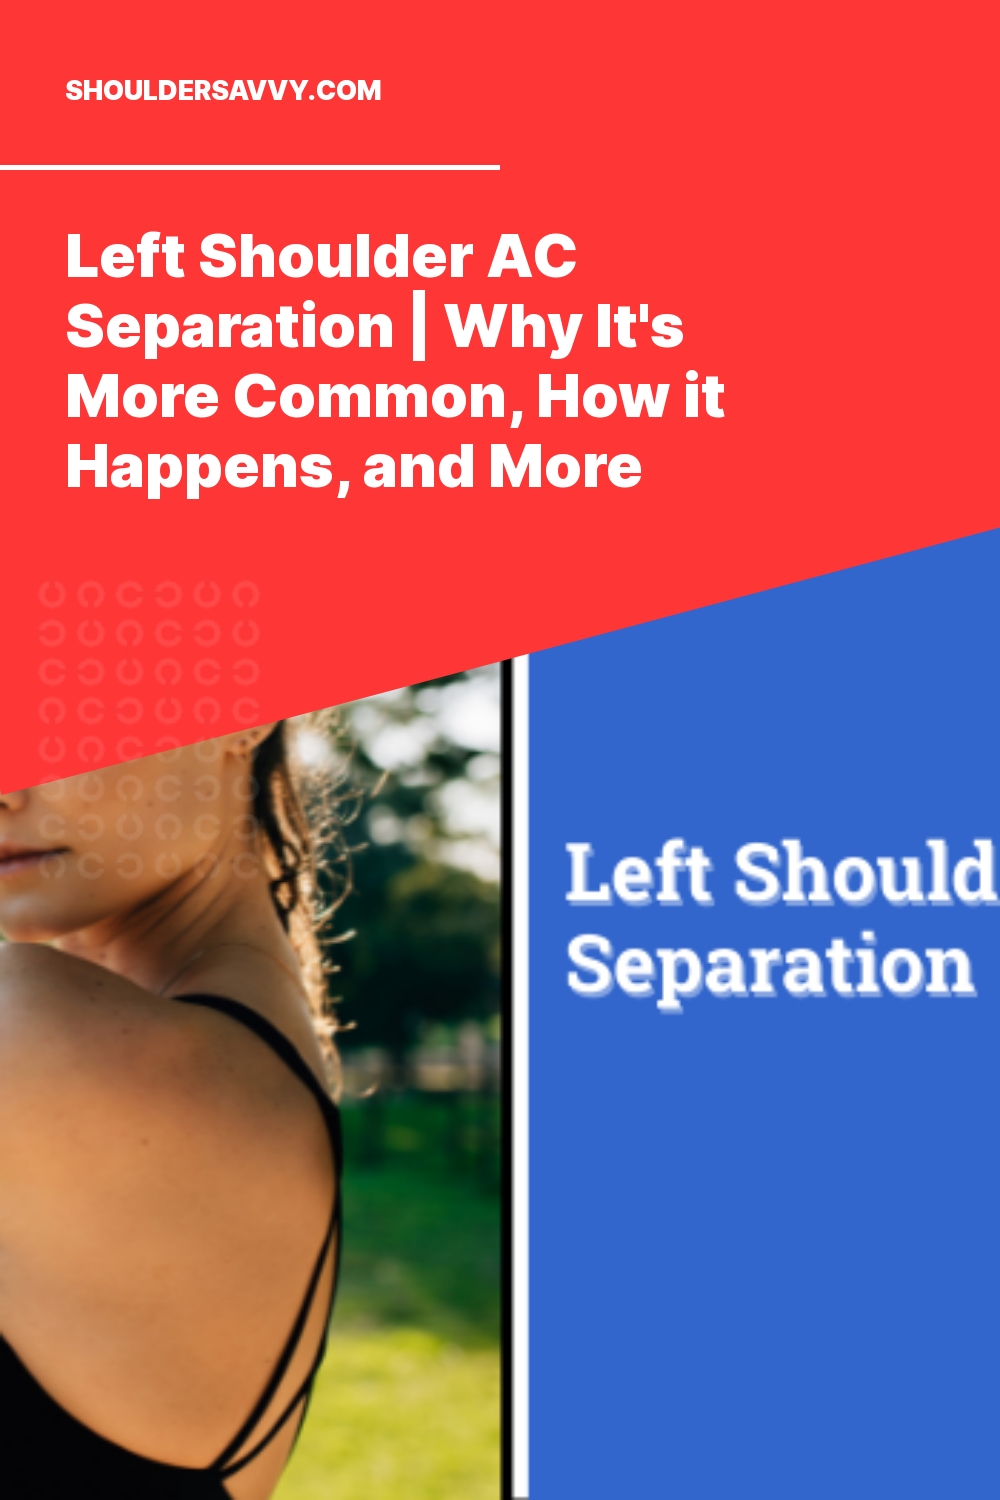 Left Shoulder AC Separation | Why It’s More Common, How it Happens, and More